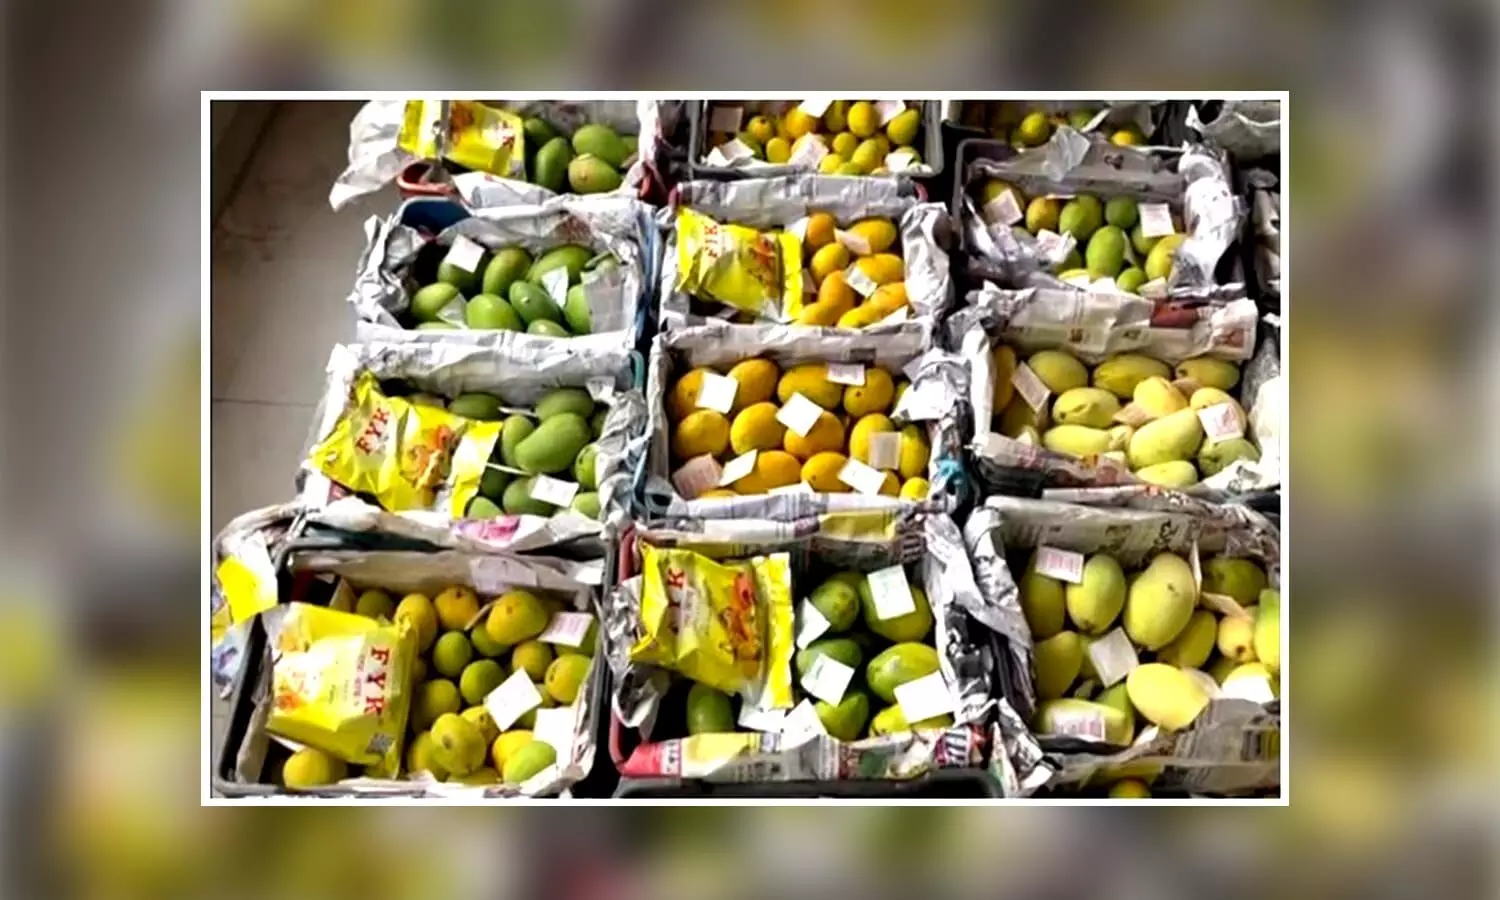 Hyderabad police nab two fruit vendors for selling artificially-ripened mangoes in Mozamjahi market